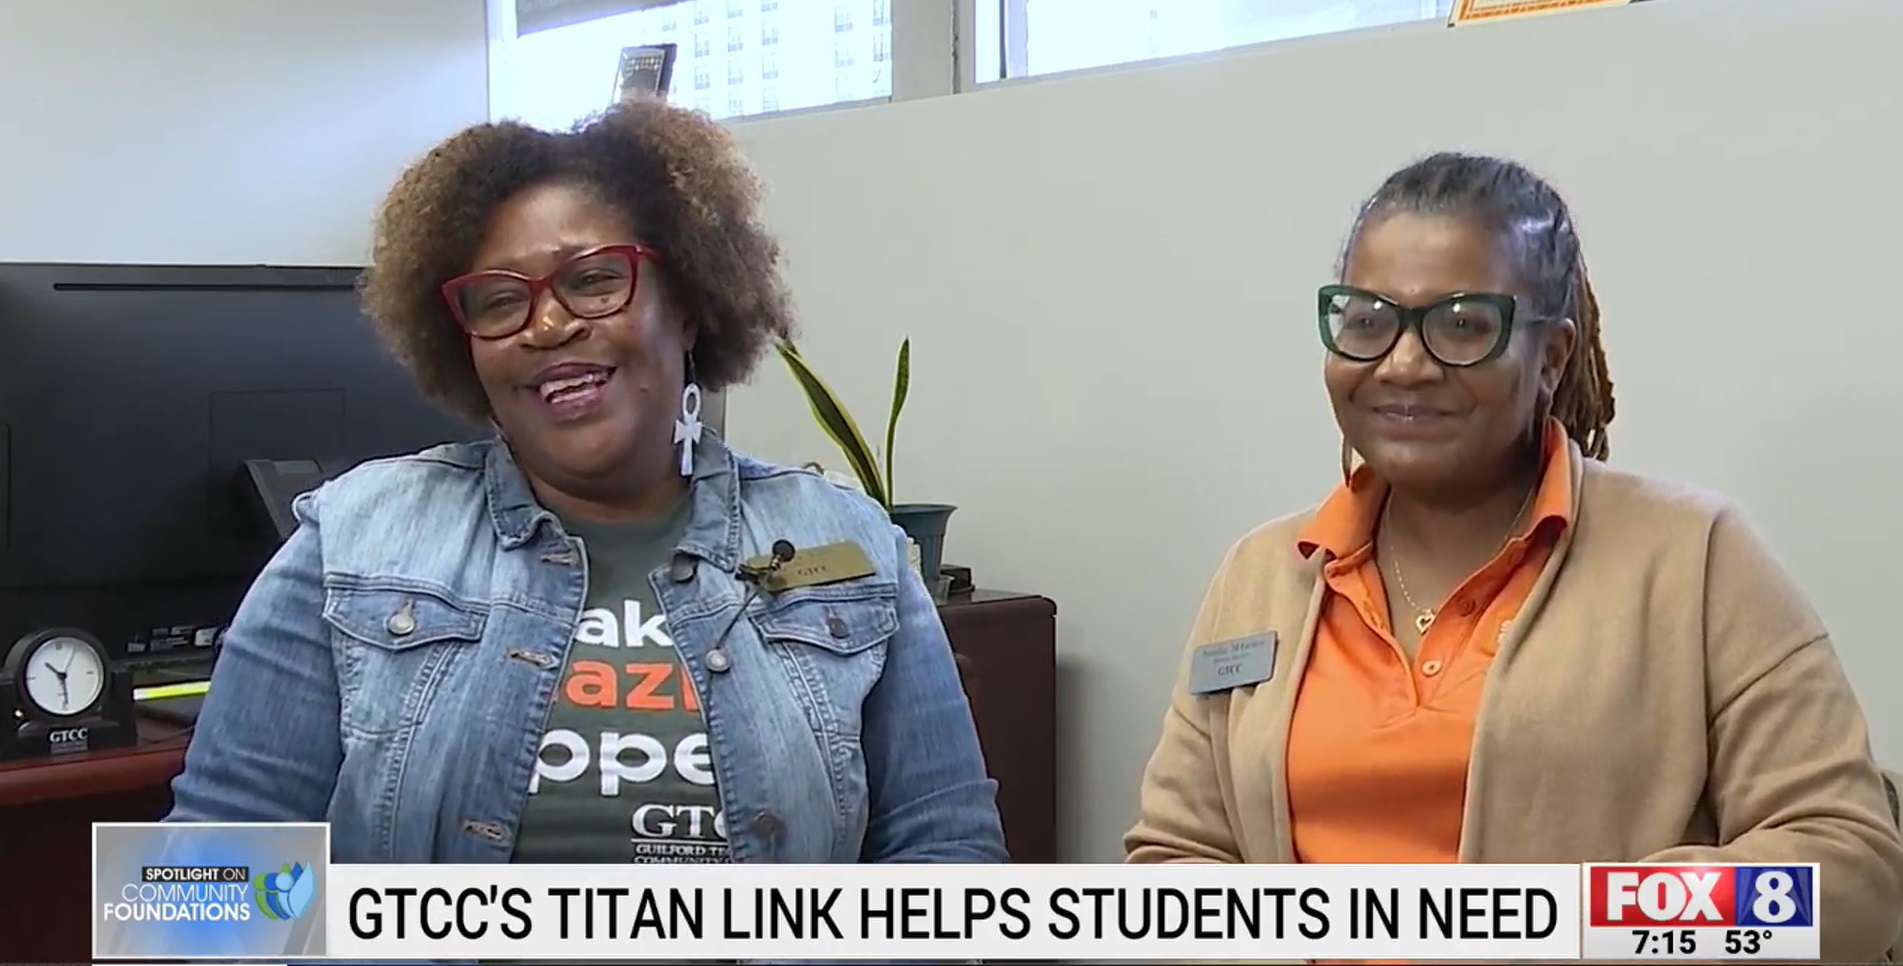 Two women at GTCC talking about Titan Link, a student help service.